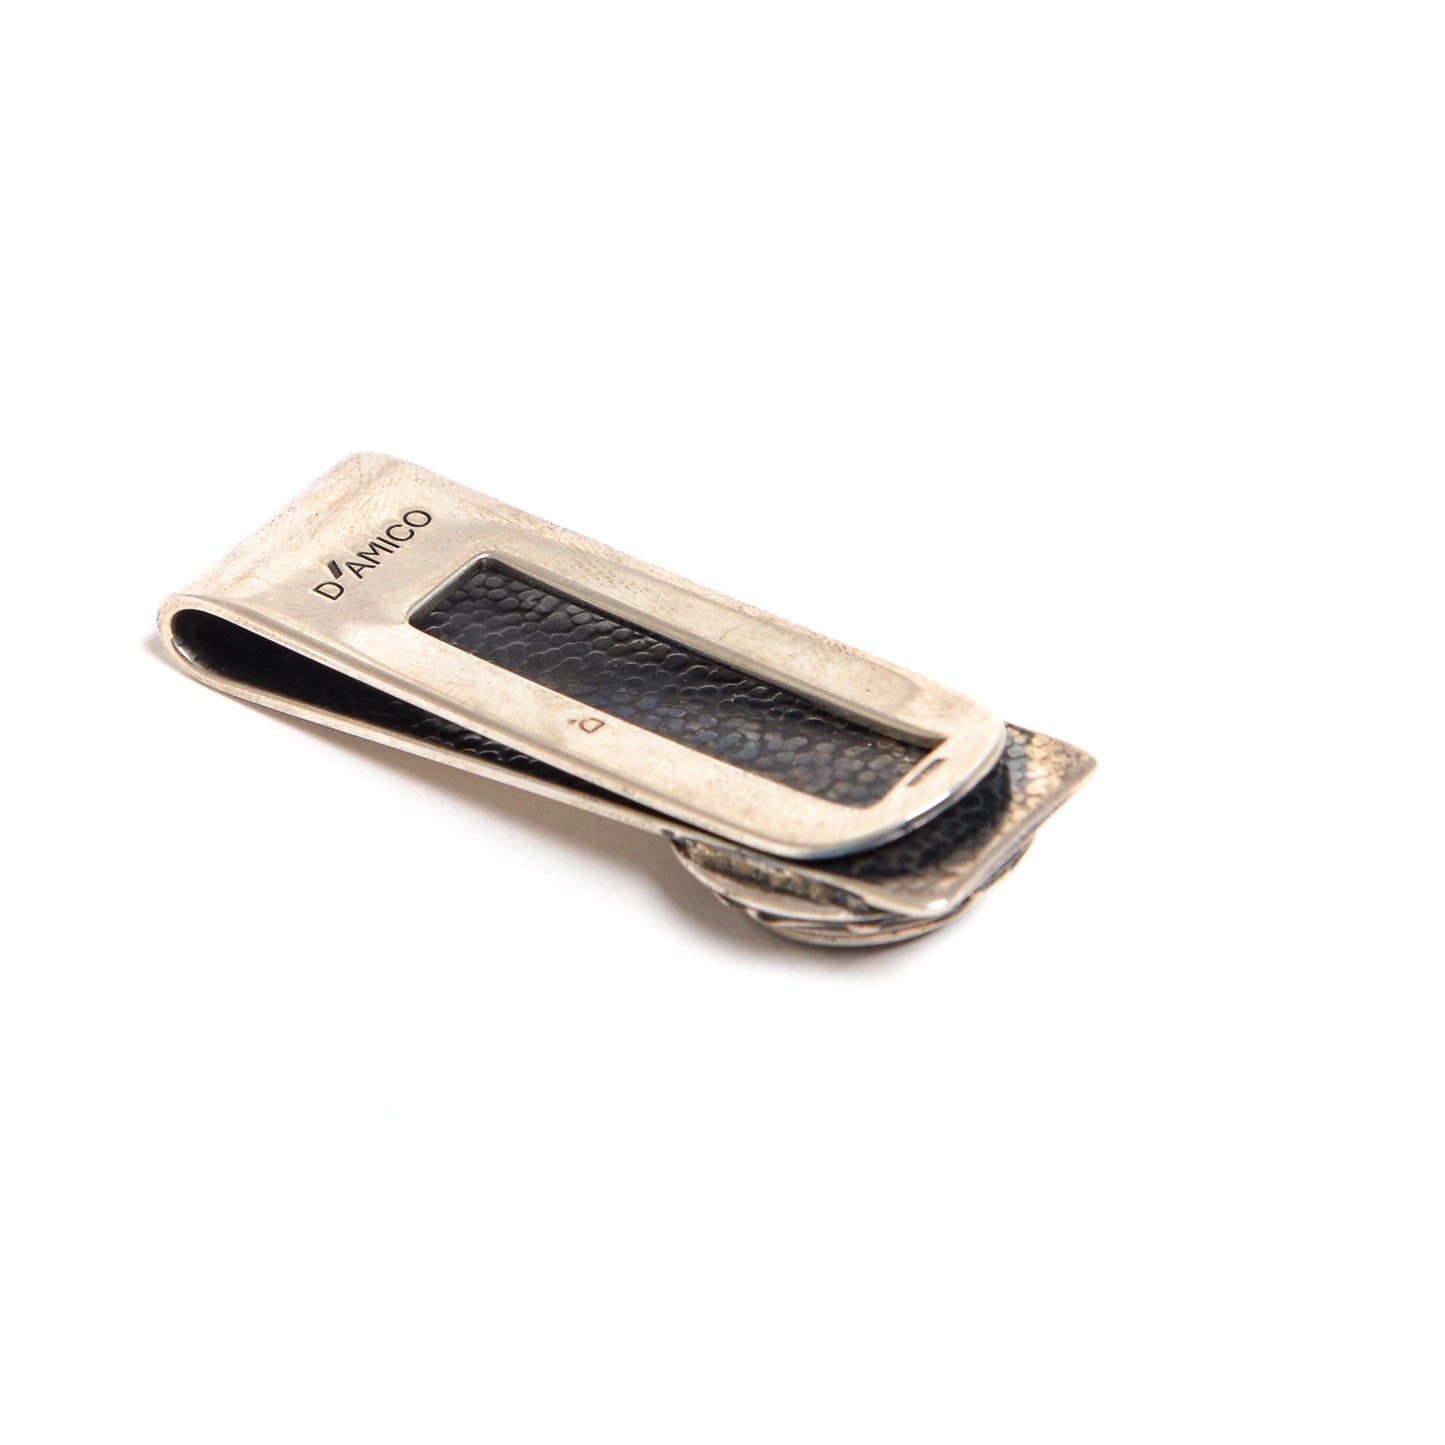 Round Money Clip with Lacquer